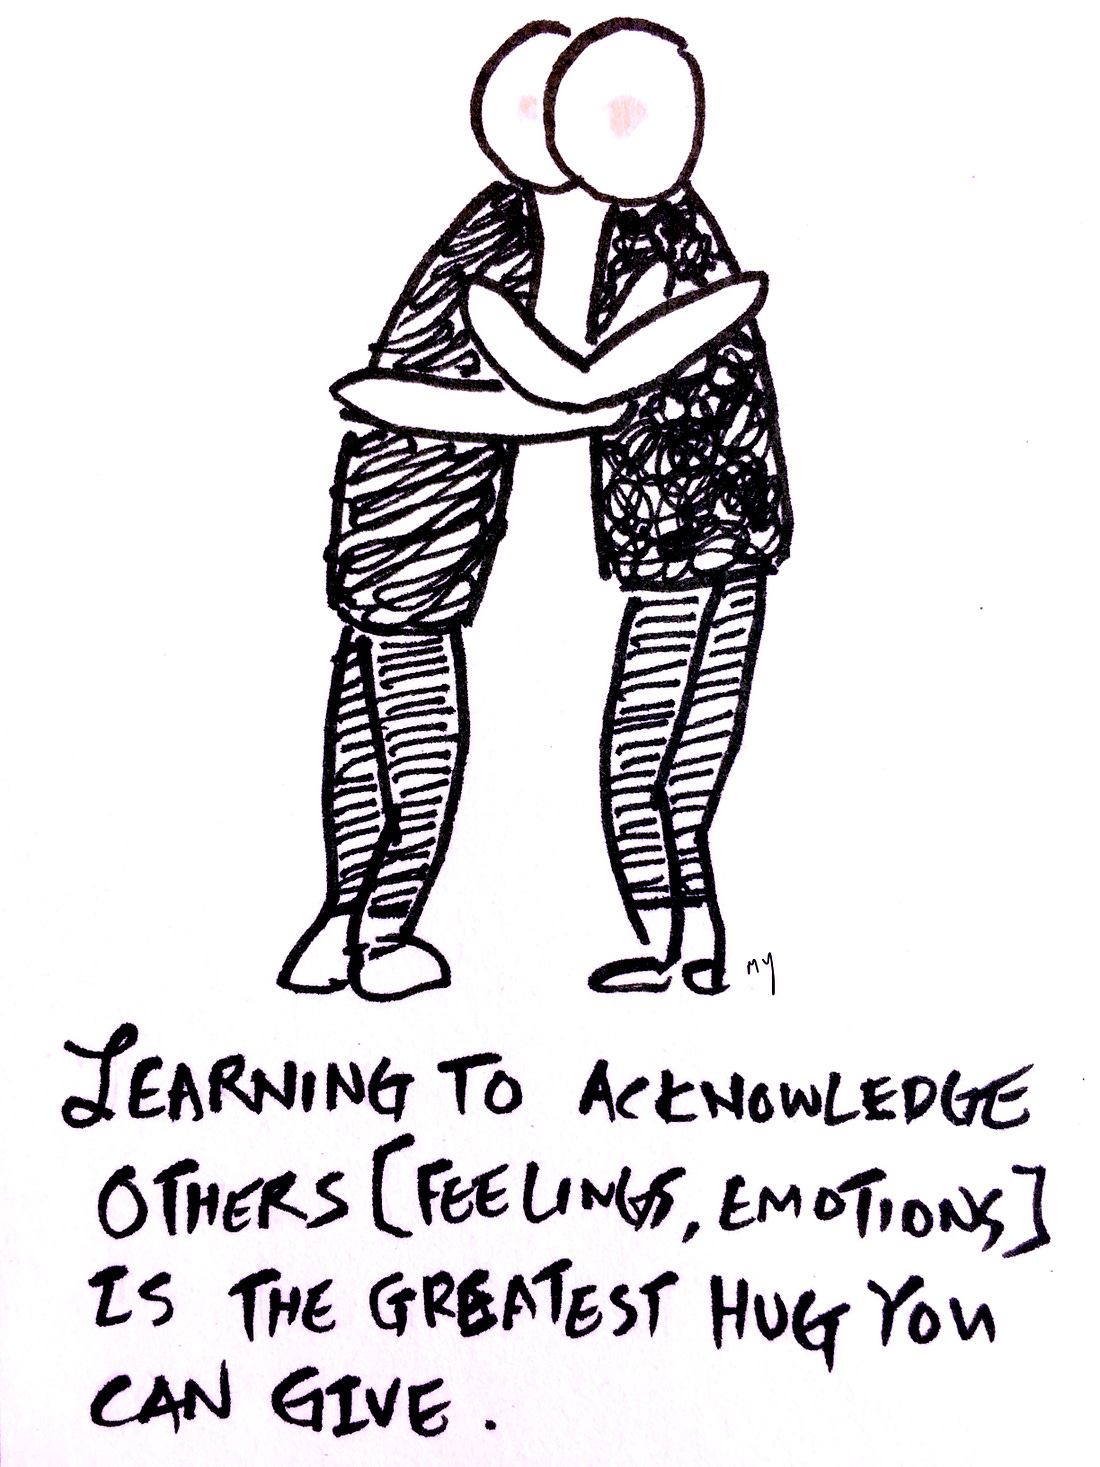 The last panel showed the two people hugging. The caption reads: Learning to acknowledge others [feelings and emotions] is the greatest hug you can give. 